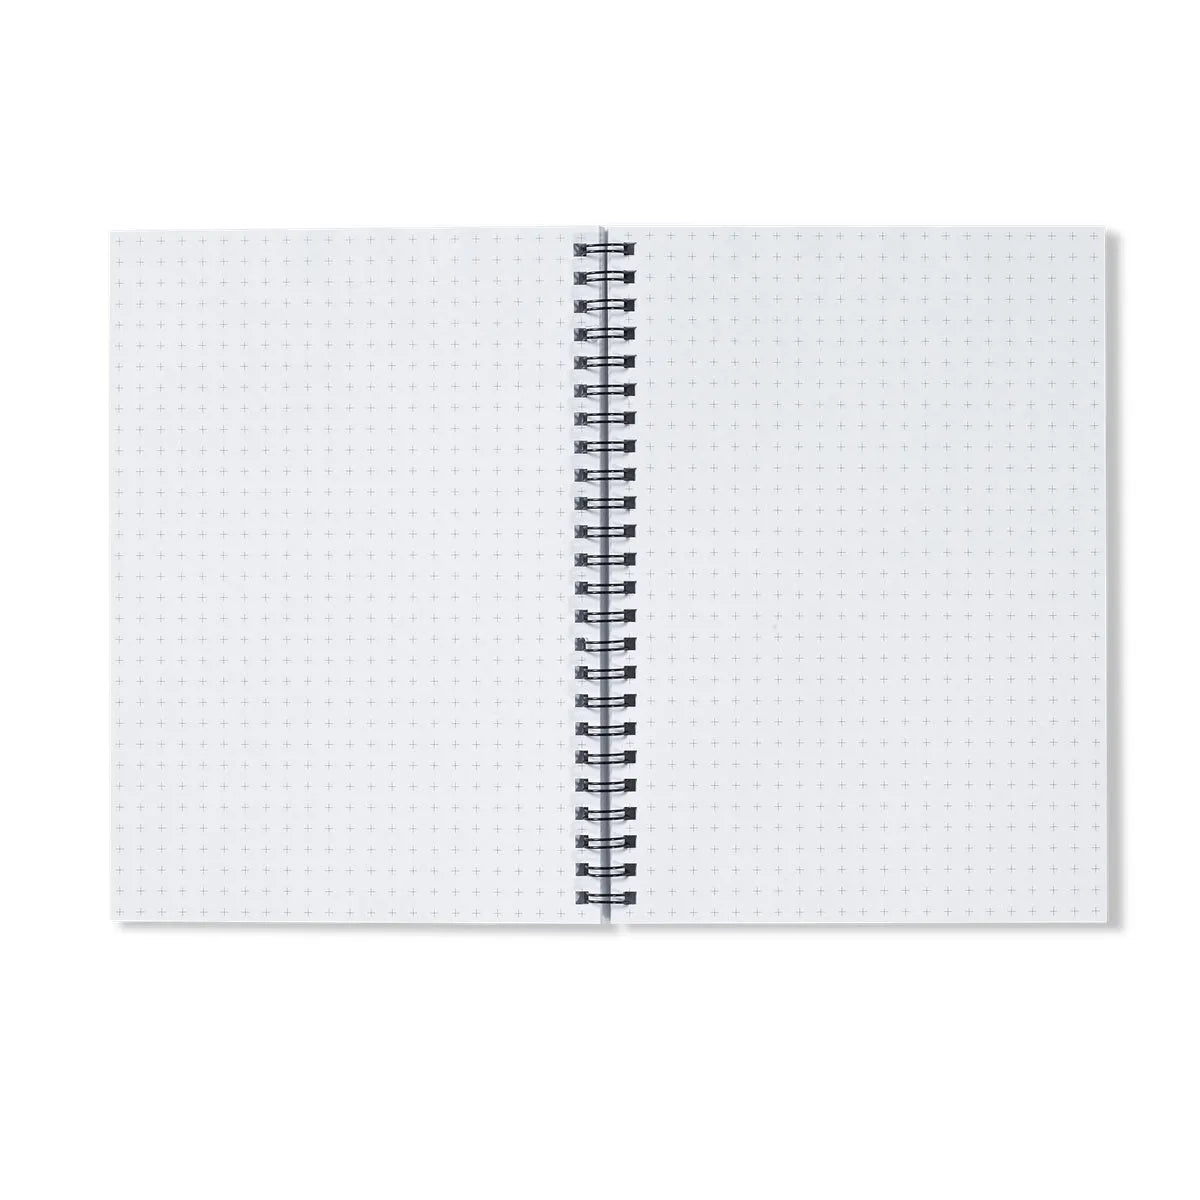 Suggestions Pour étoffes Et Tapis By E. A. Séguy Notebook - Notebooks & Notepads - Aesthetic Art